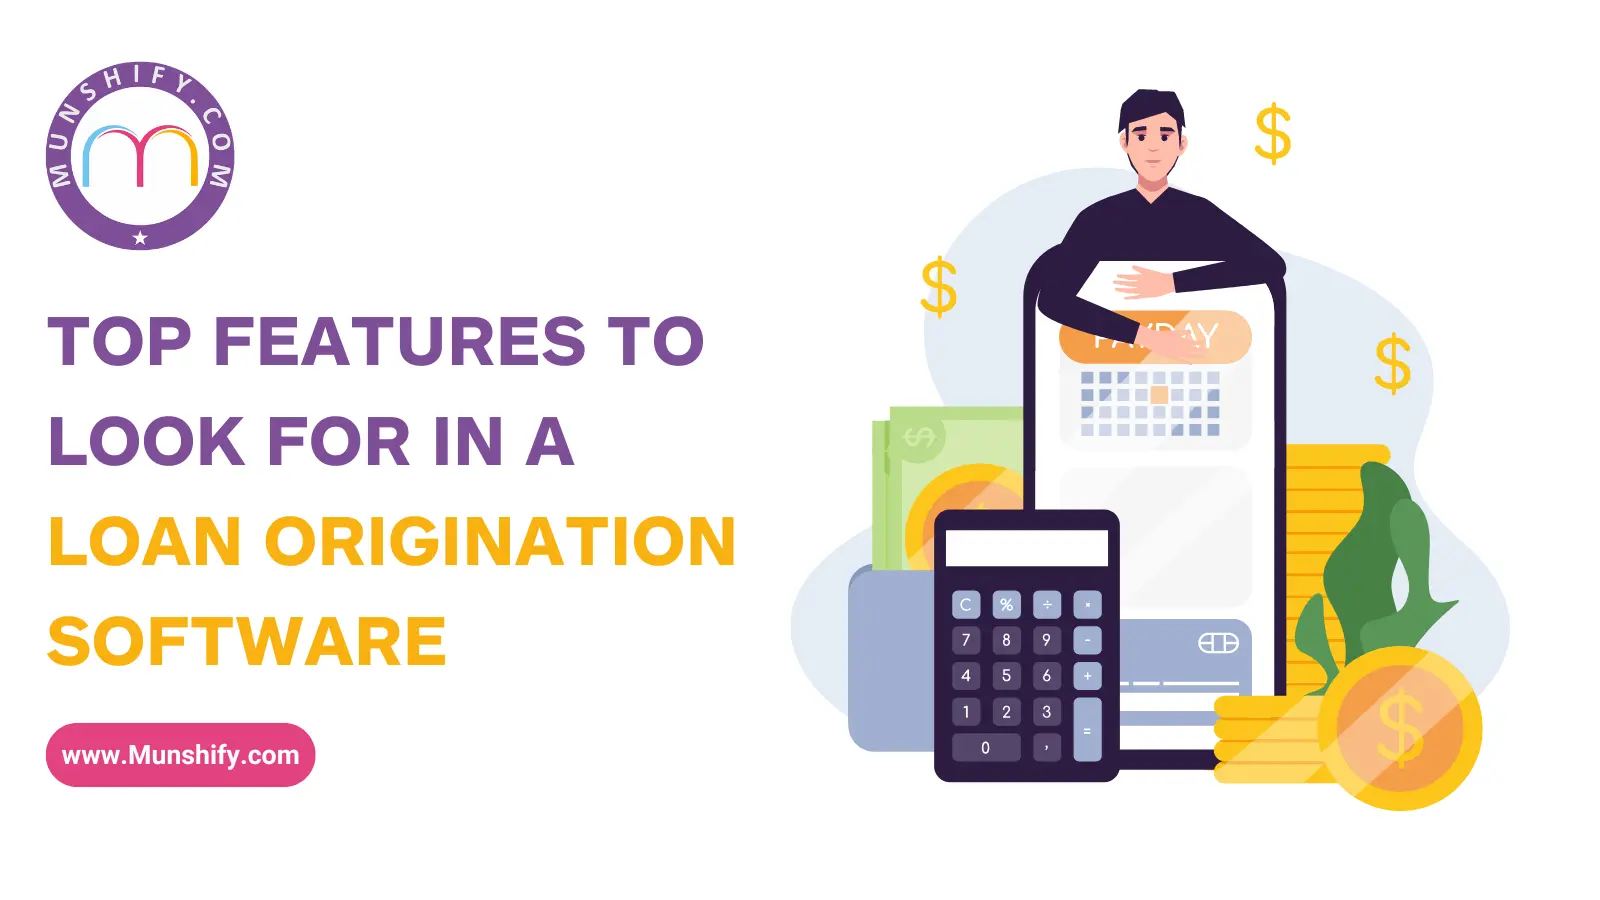 Loan origination software makes managing loans easier. Learn the key features you need to improve your system today.